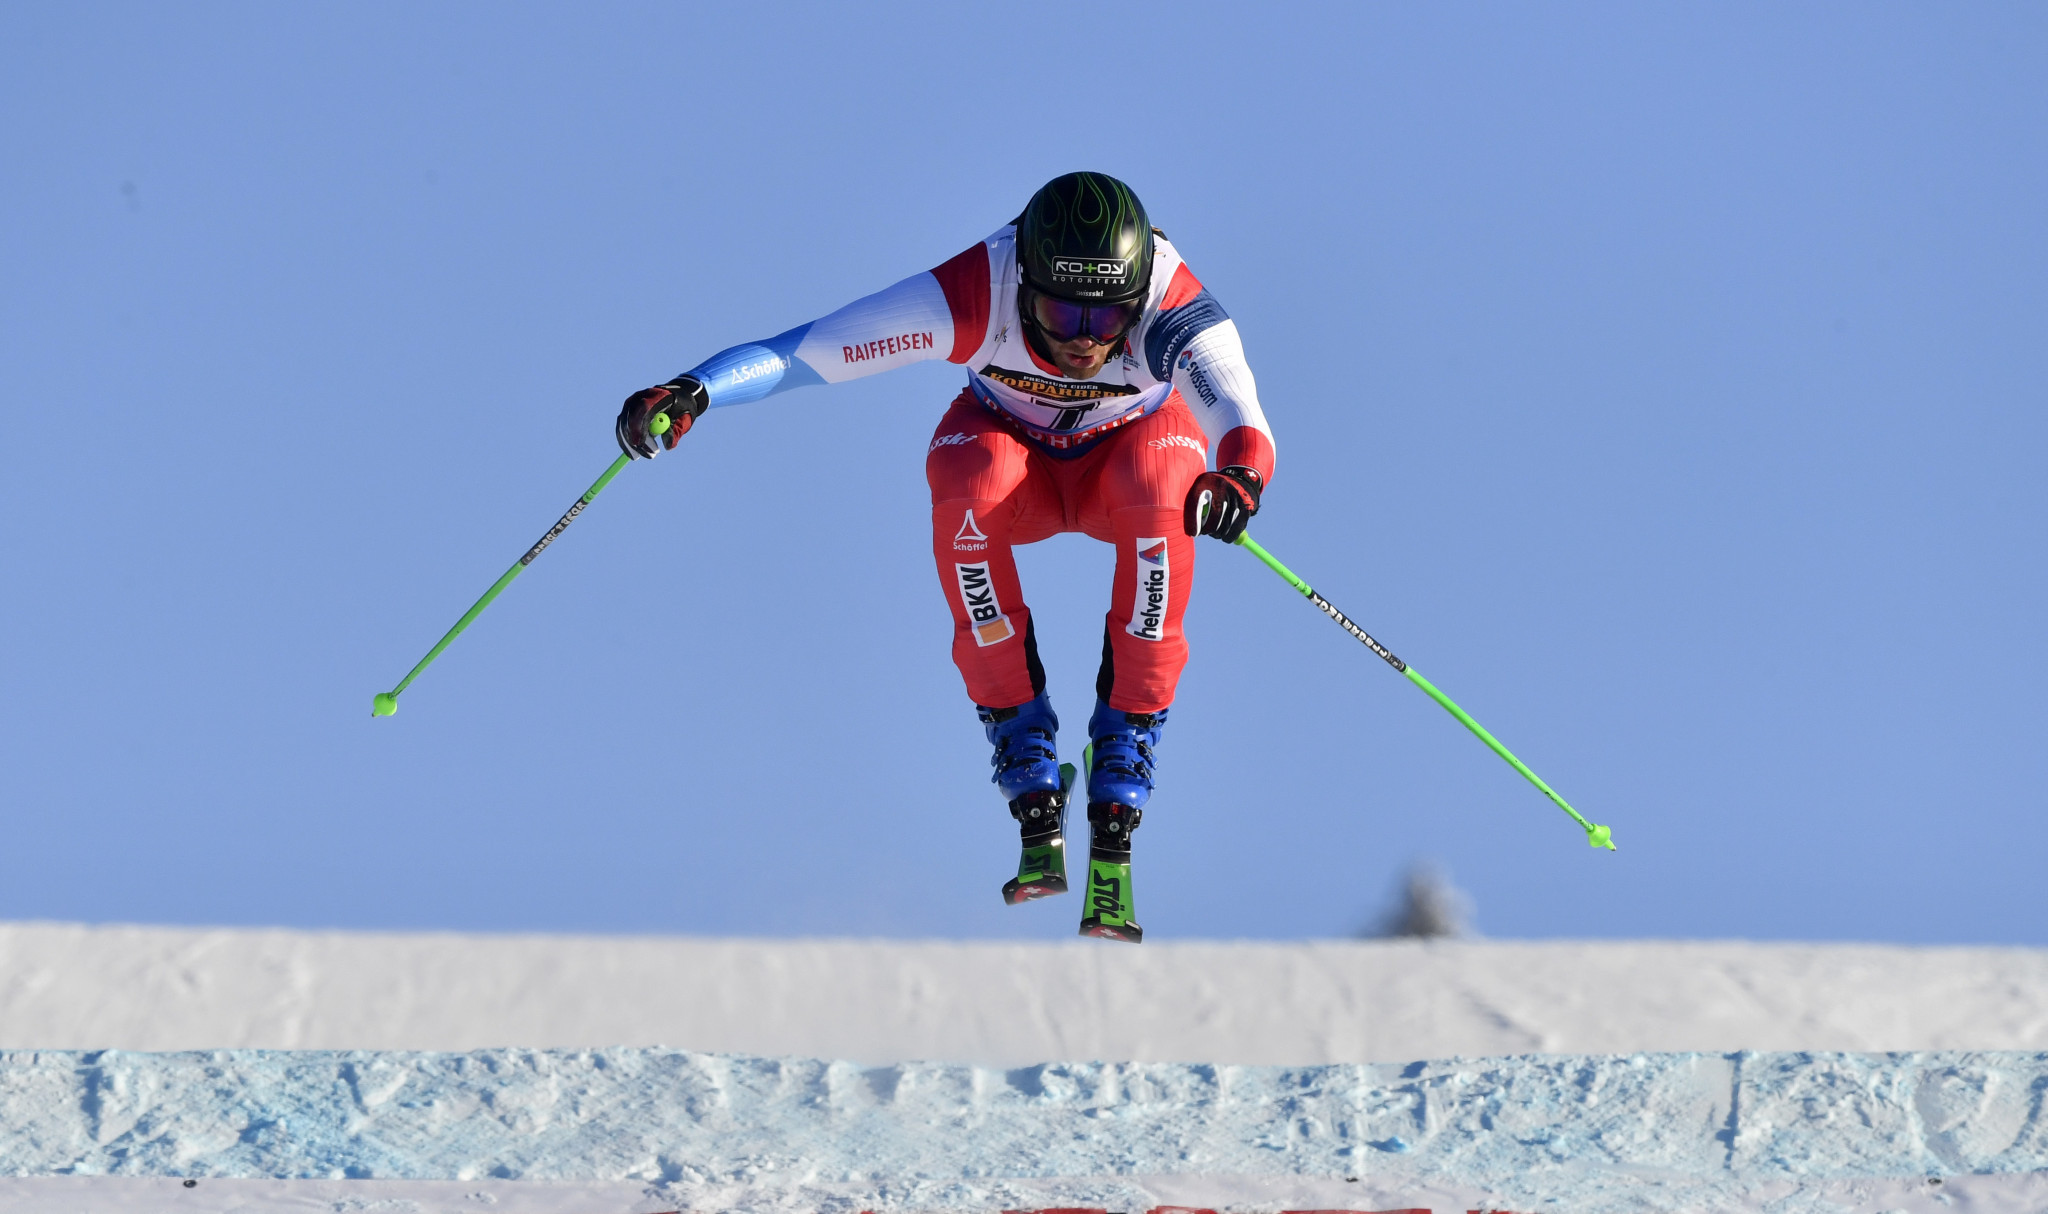 Jonas Lenherr won the men's event in Reiteralm today ©Getty Images